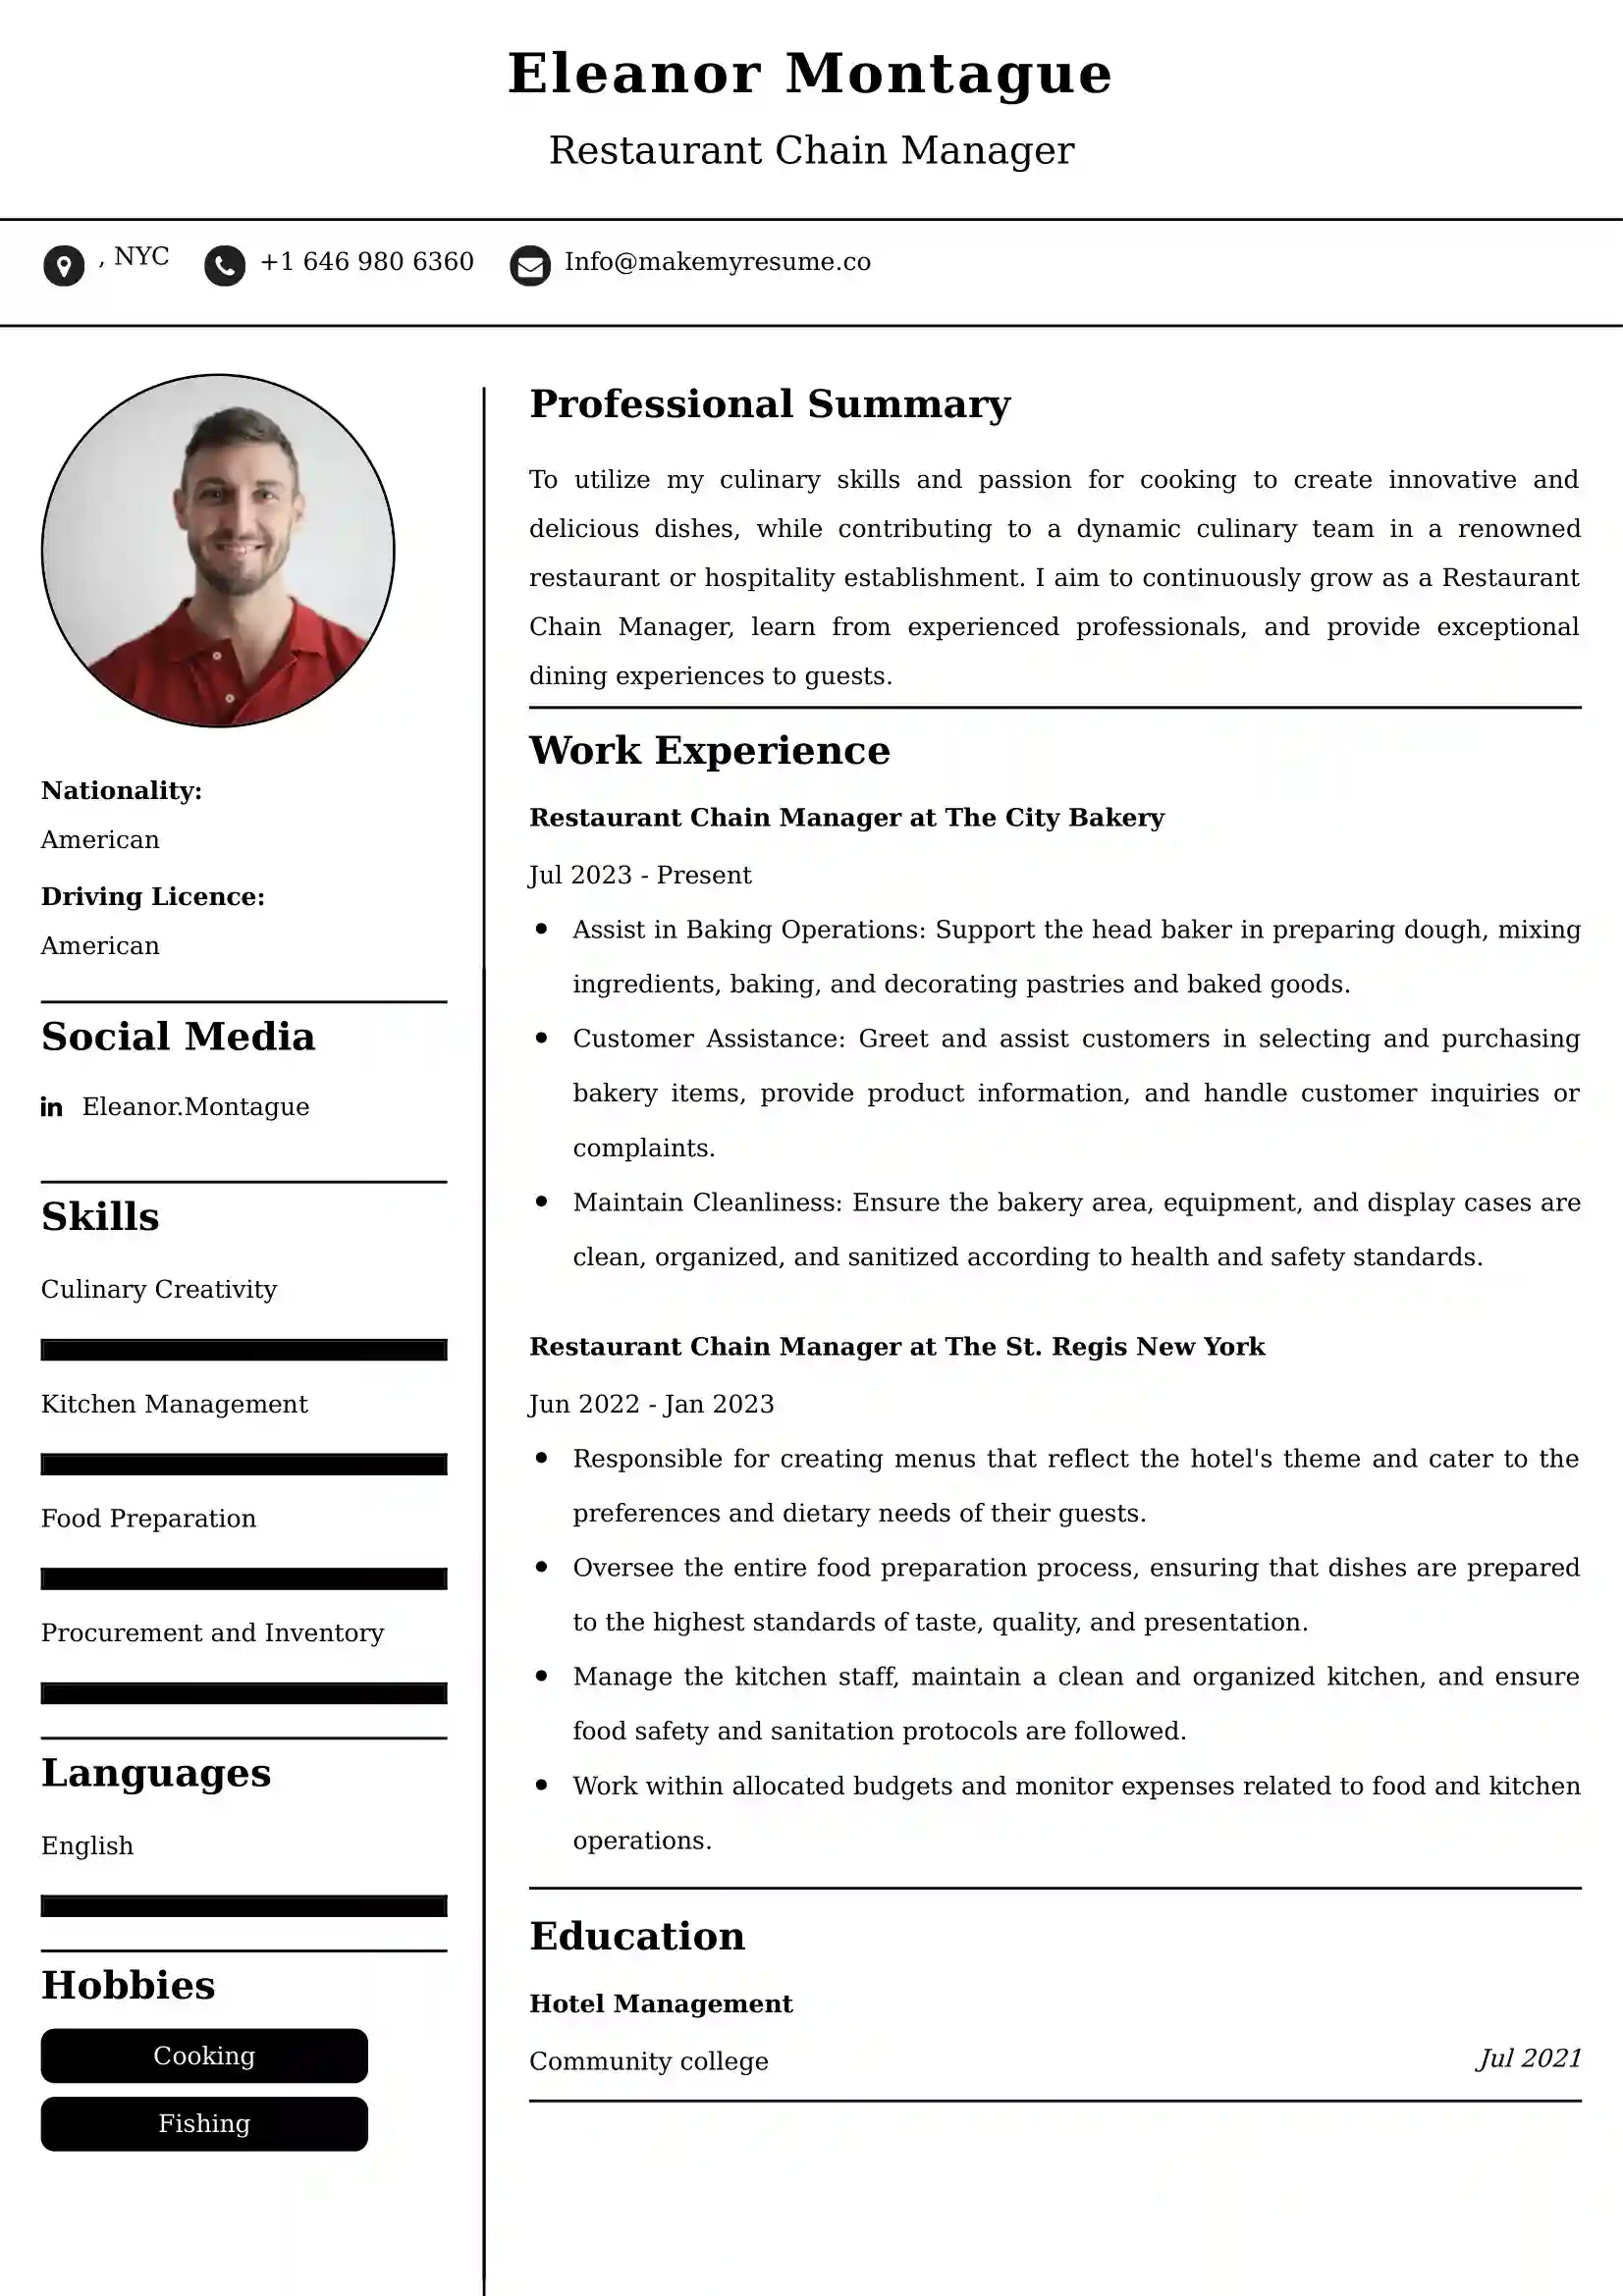 Restaurant Chain Manager Resume Examples for UK Jobs - Tips and Guide